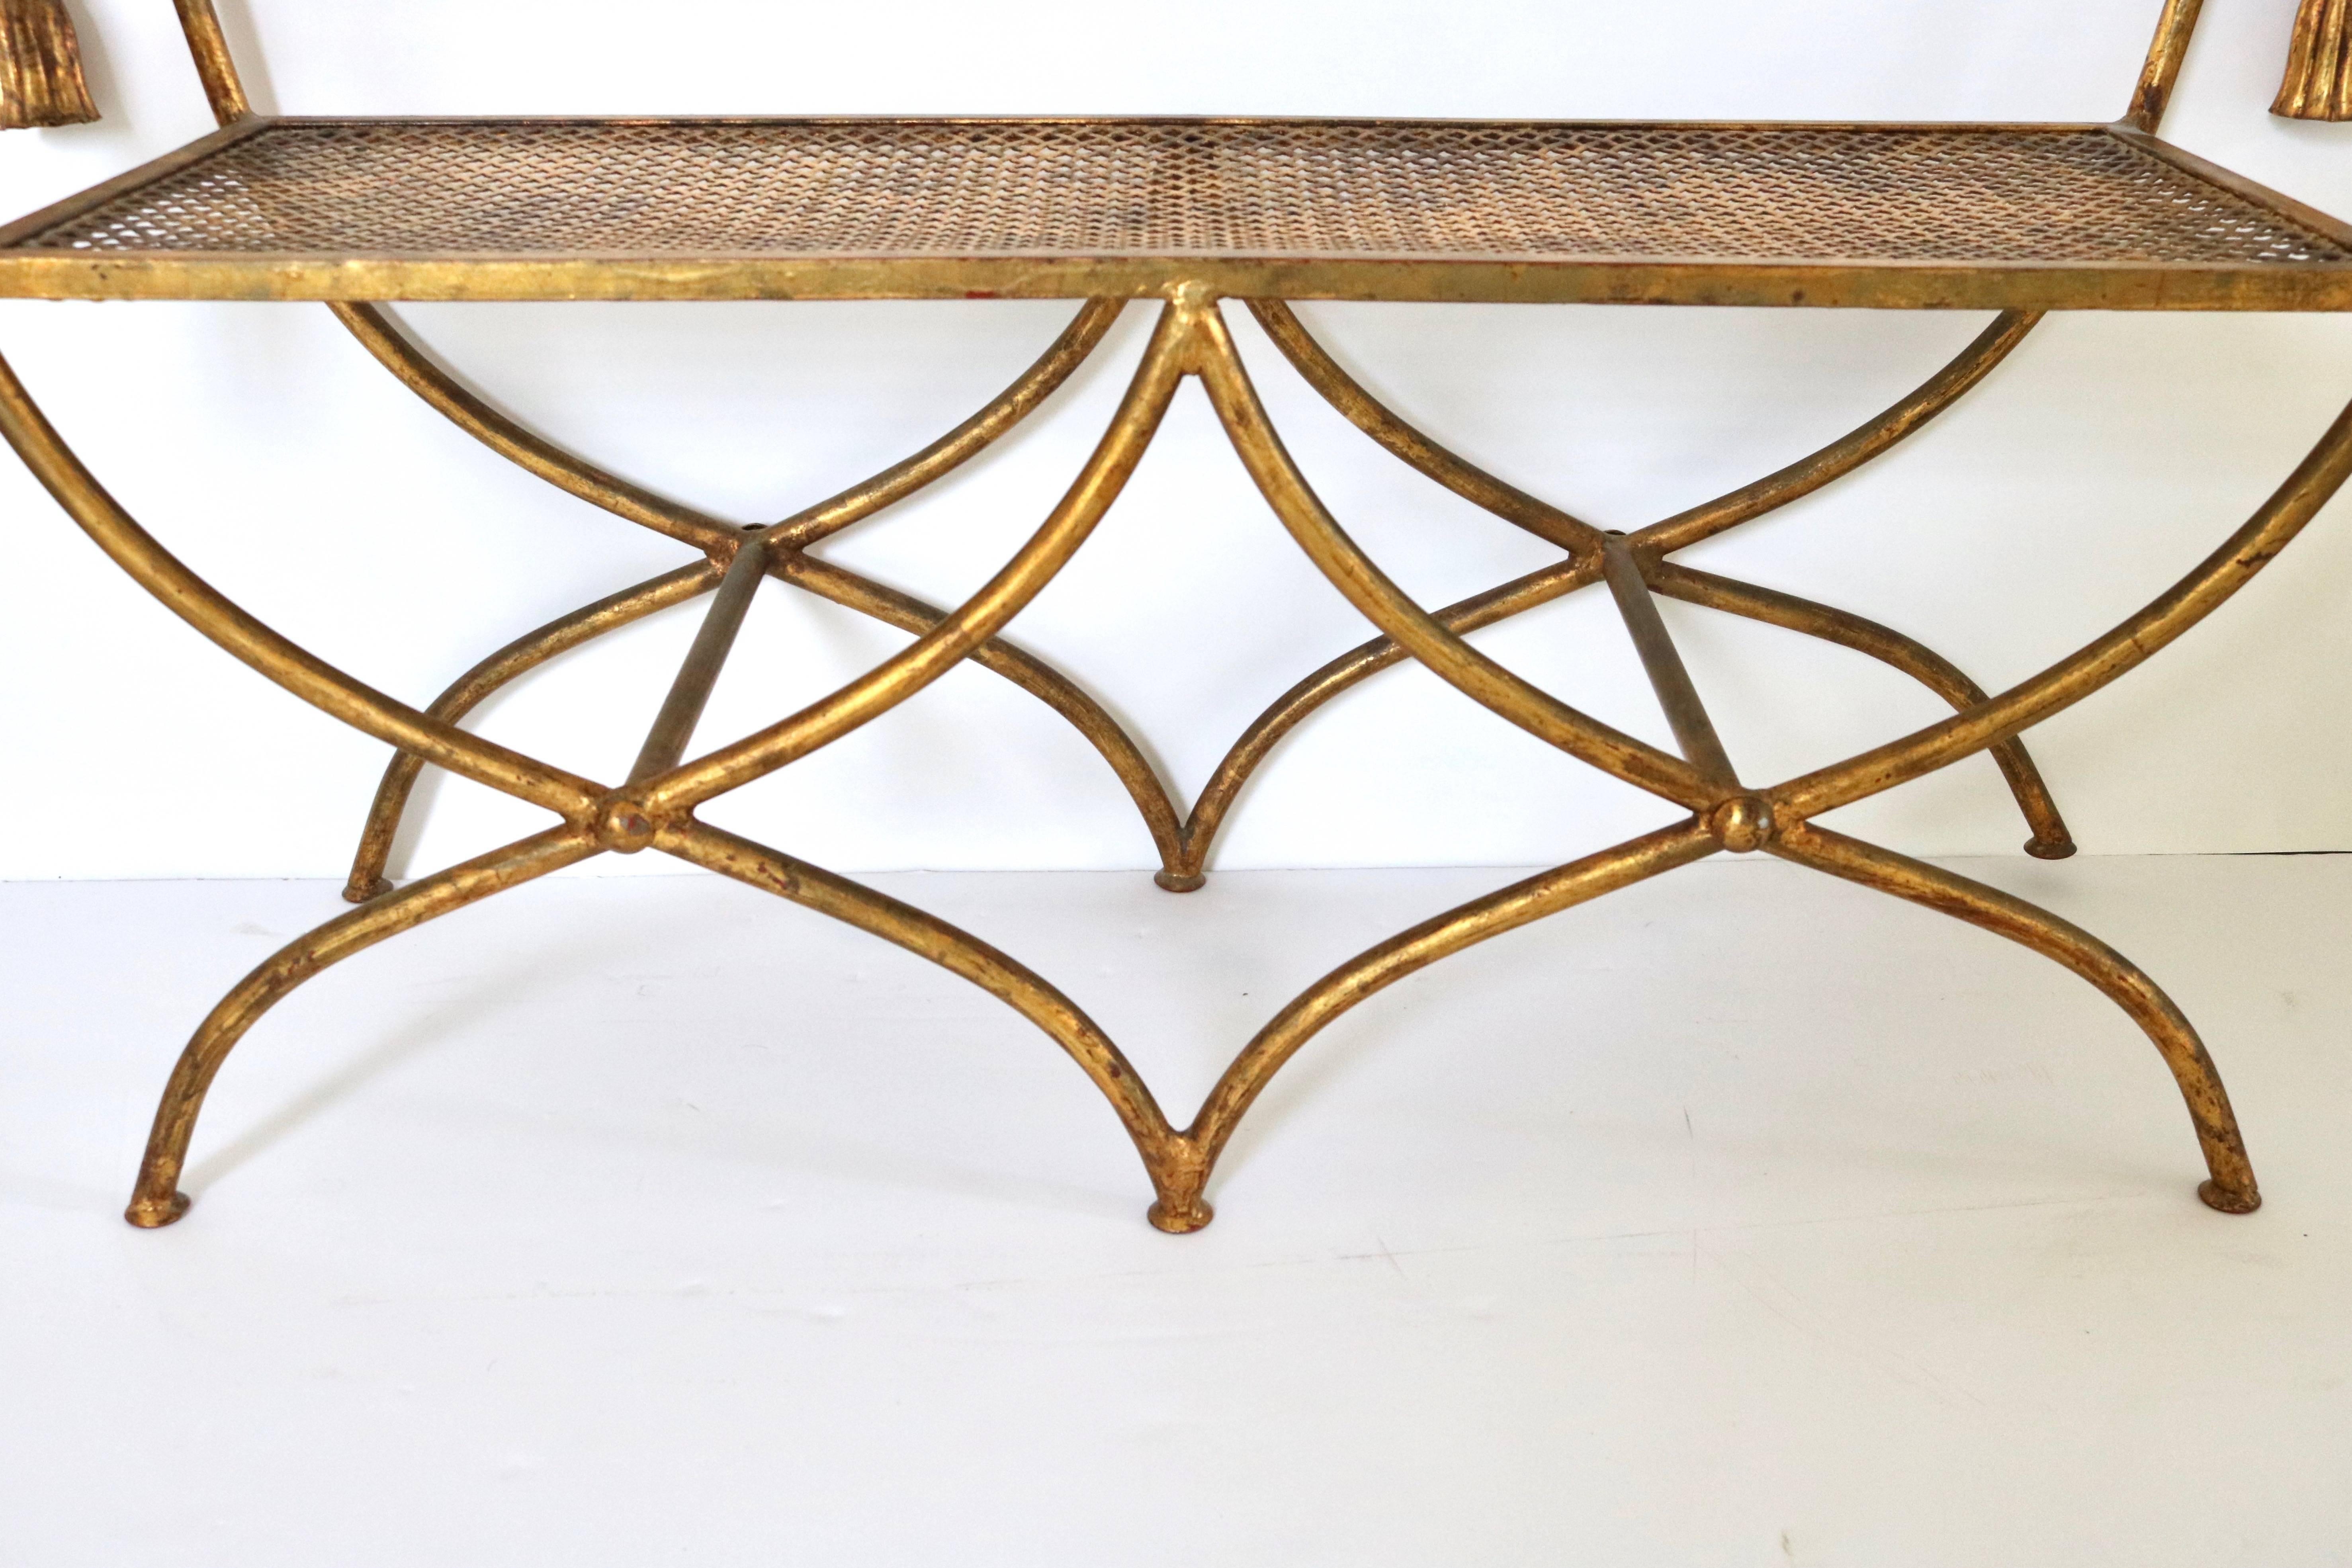 20th Century Hollywood Regency, Florentine, Italian Gold Leaf, Double Bench with Cushion